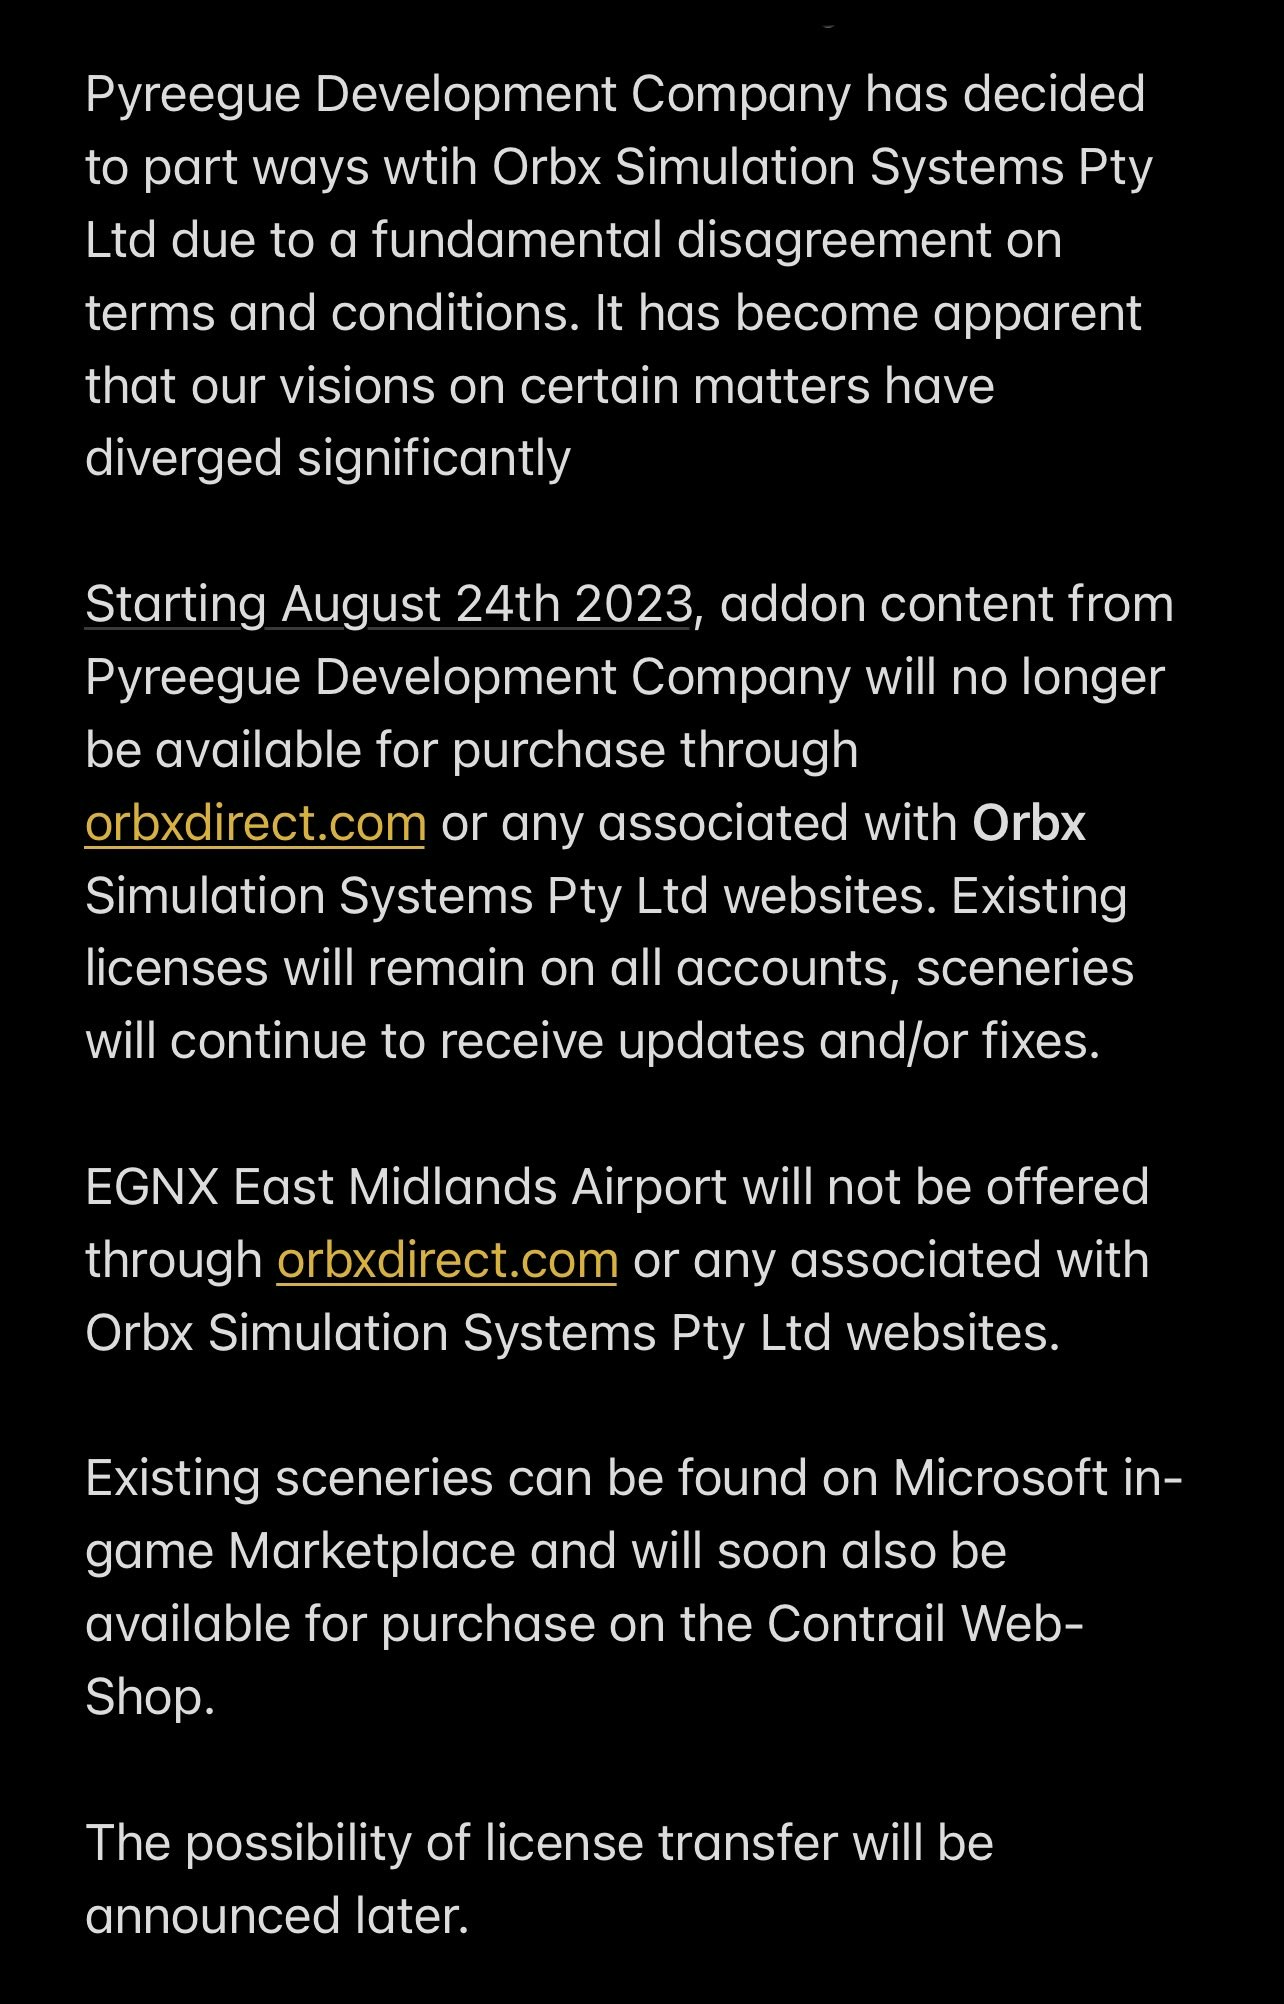 Pyreegue Dev Co Terminates Relationship with Orbx